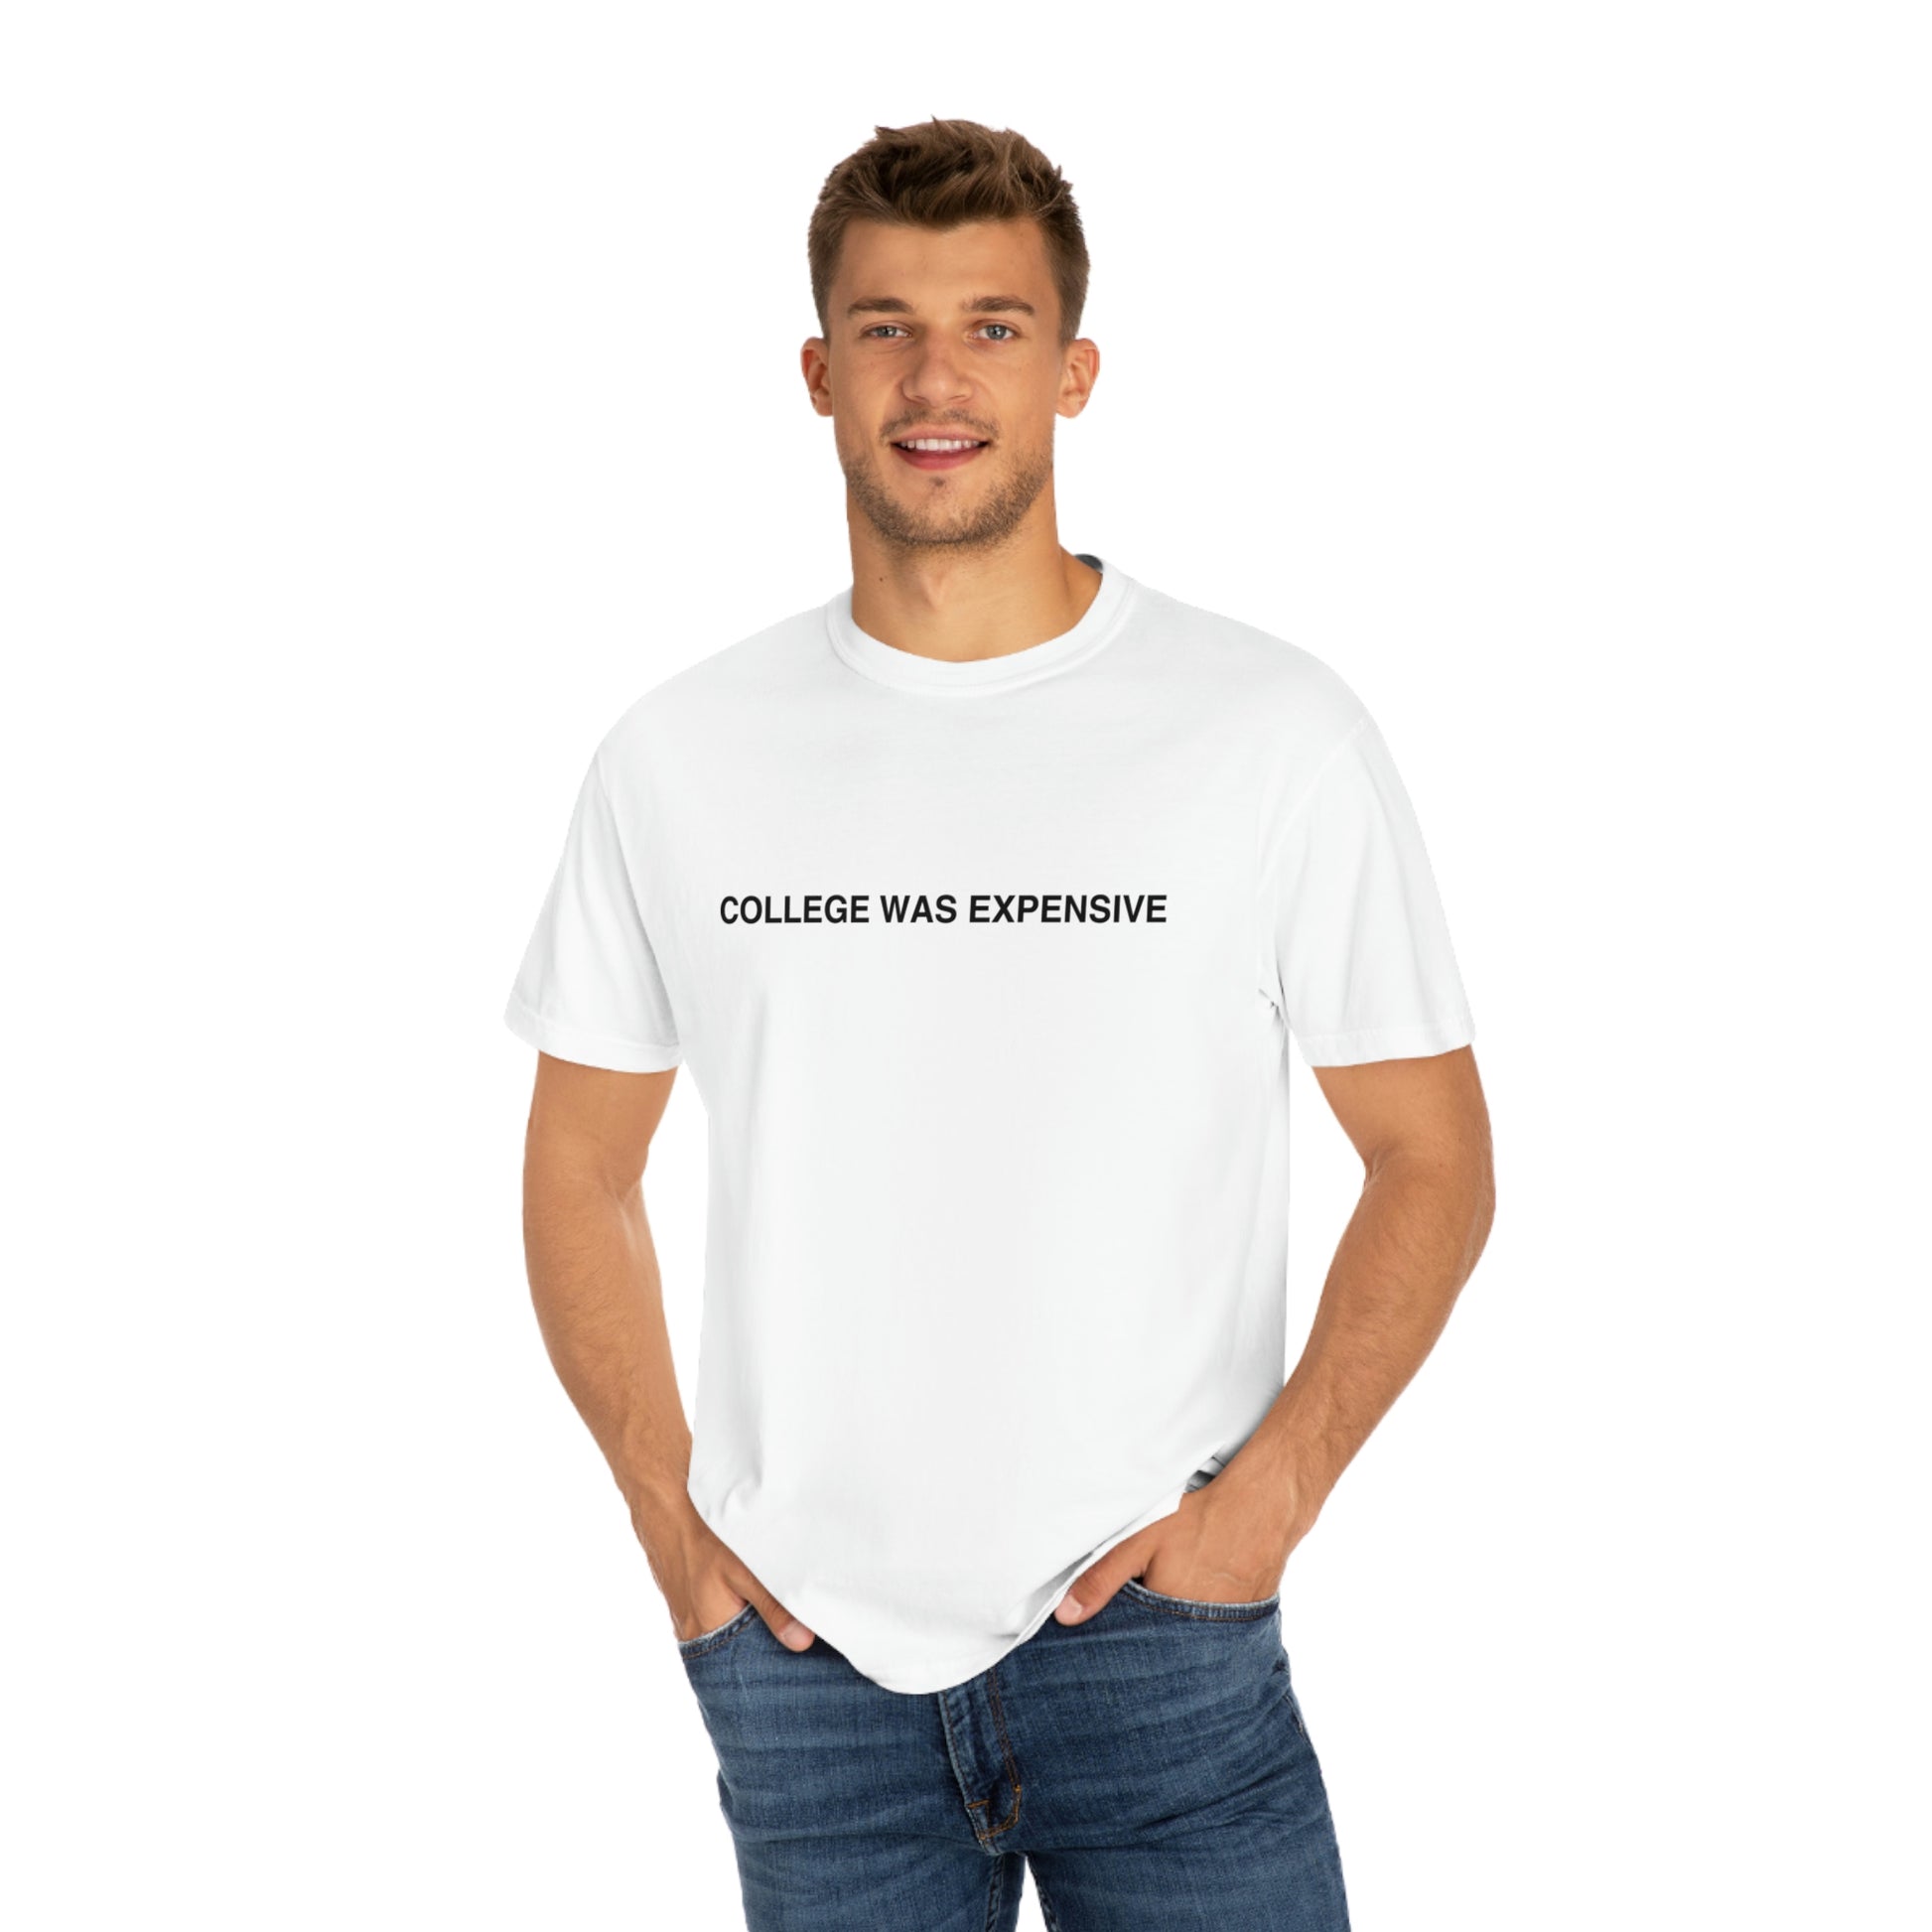 COLLEGE WAS EXPENSIVE t-shirt